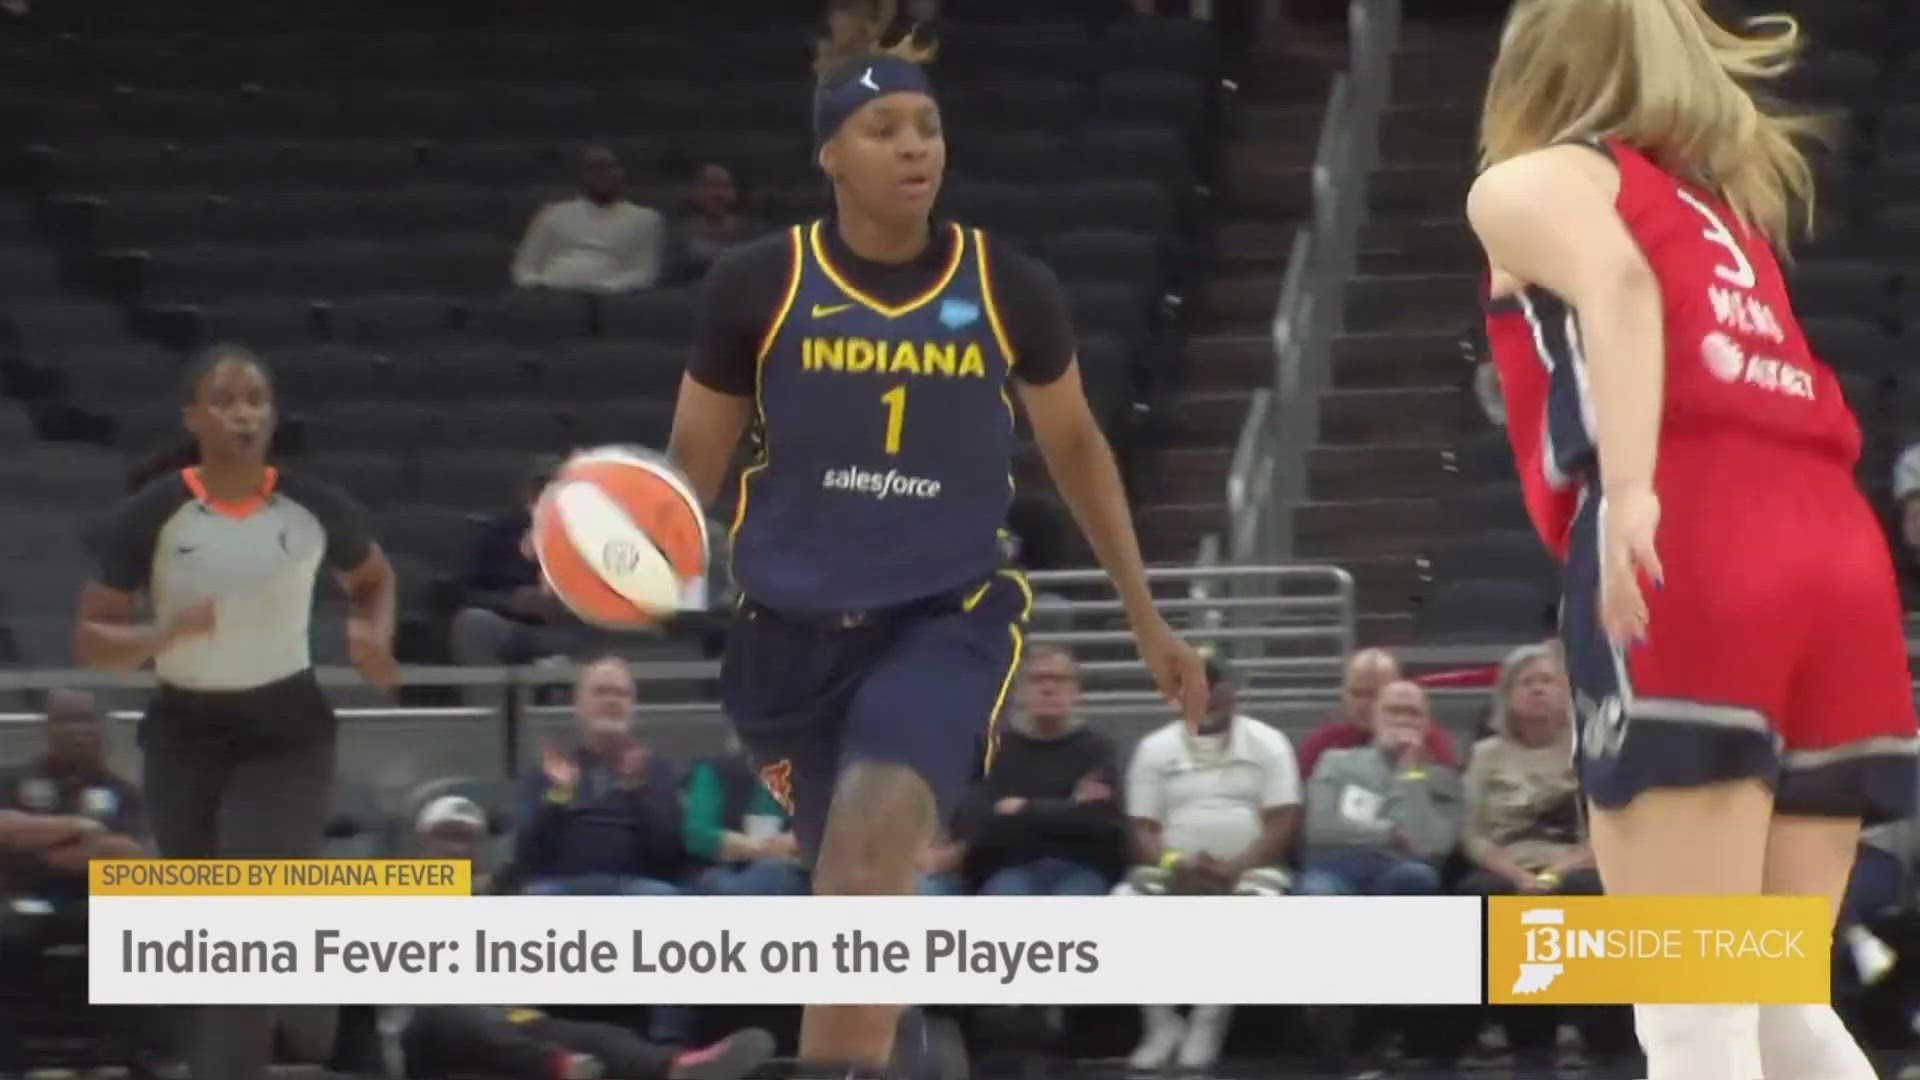 NaLyssa Smith is in her second year with the Indiana Fever. She wears #1 on her jersey and is a Forward on the team.